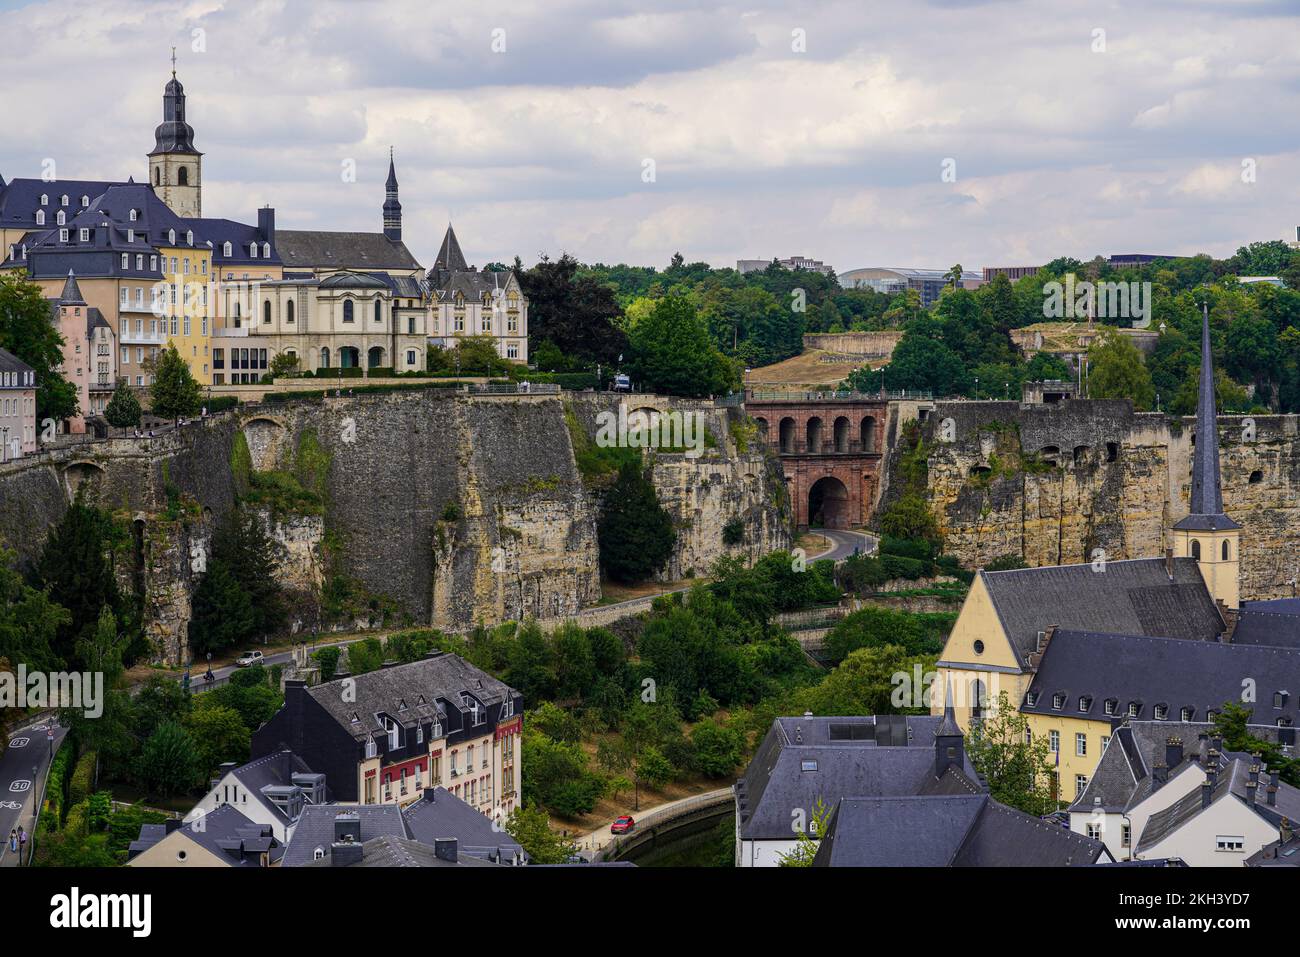 Since 1994, the old quarters and fortifications of the city of Luxembourg have been included in the Unesco World Heritage List. Stock Photo